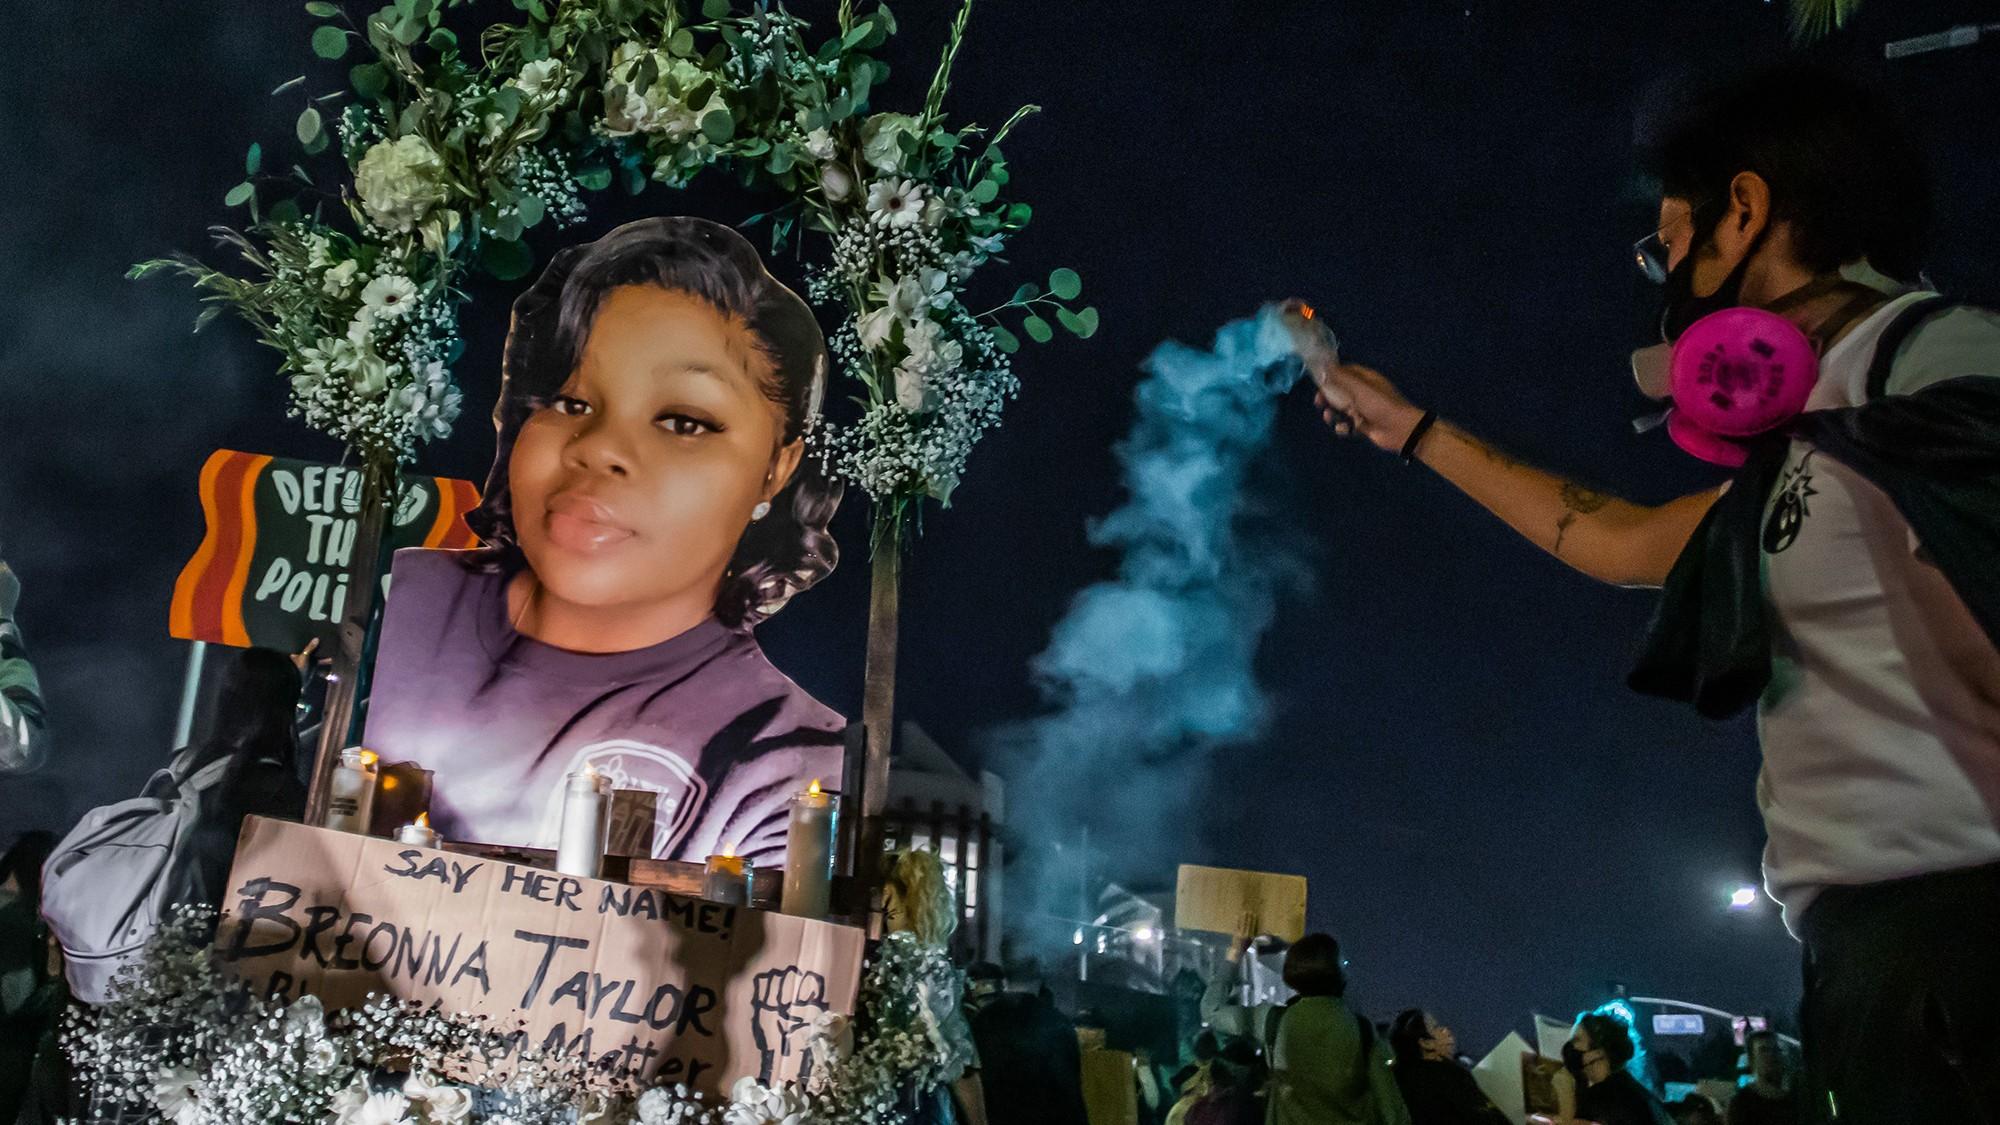 Protesters march against police brutality in Los Angeles, on Sept. 23, 2020, following a decision on the Breonna Taylor case in Louisville, Kentucky. (Apu Gomes / AFP / Getty Images)